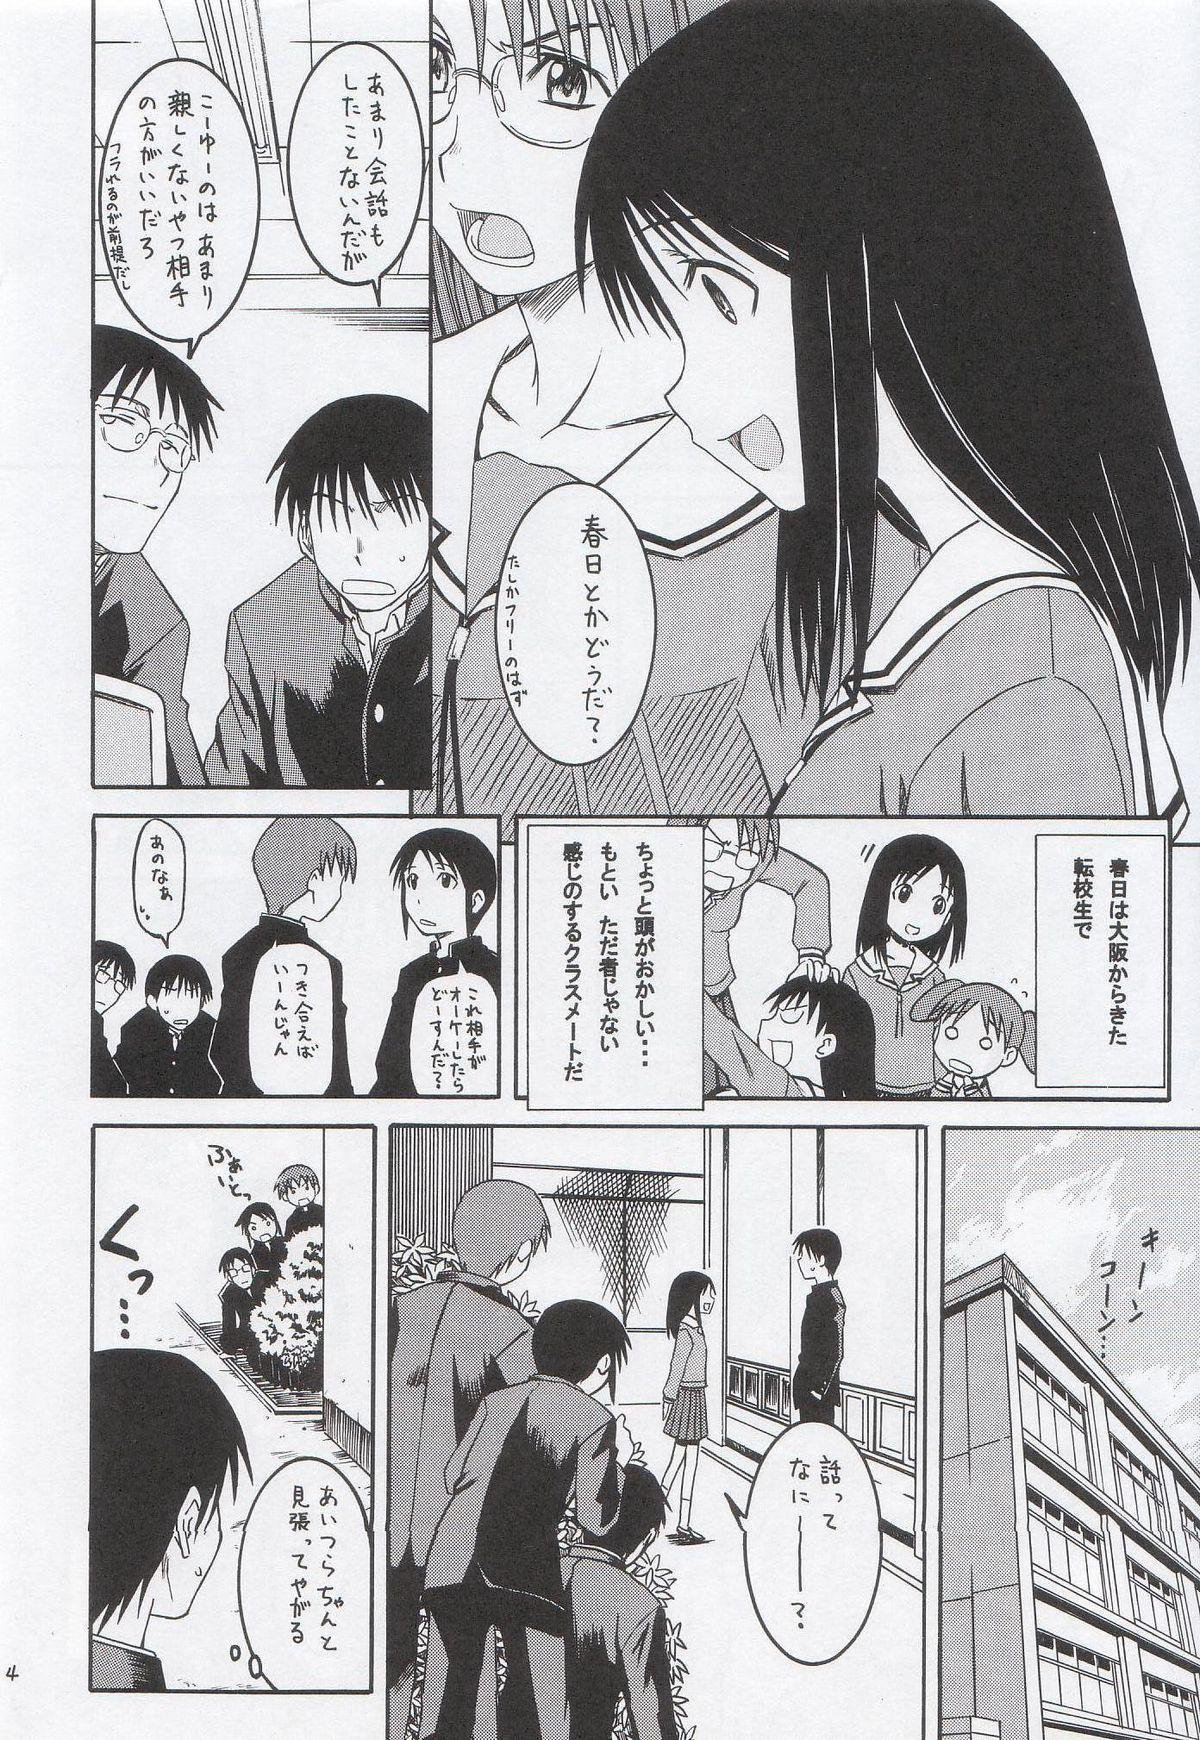 Step Brother Remake - Azumanga daioh Amateurs Gone Wild - Page 5